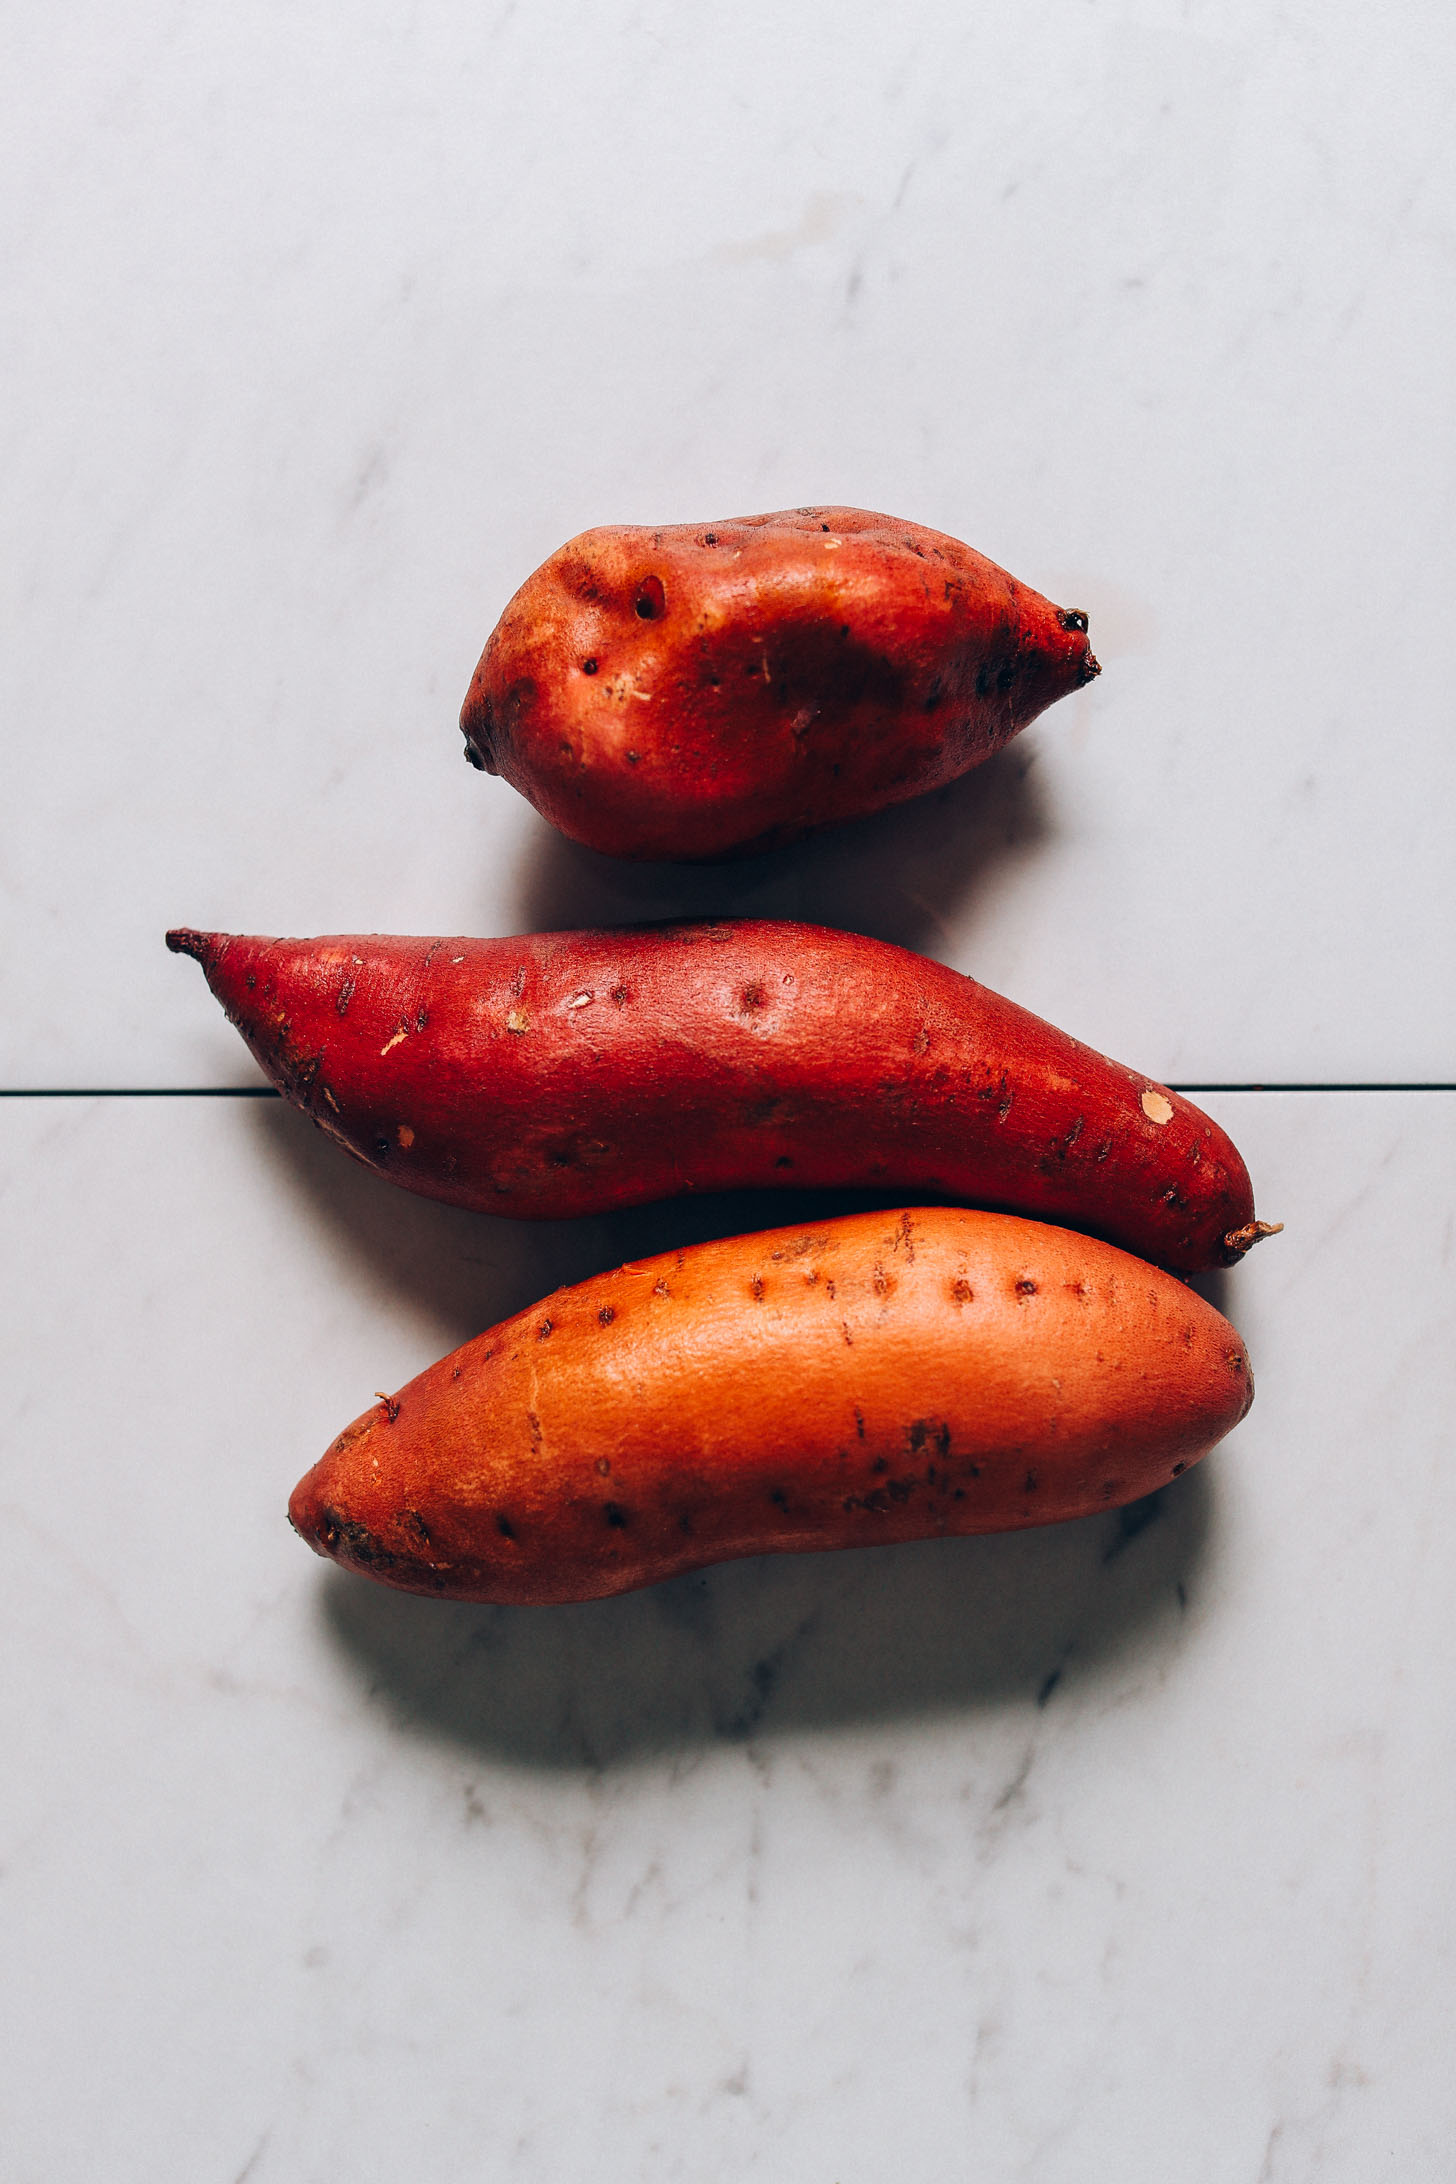 Three sweet potatoes in different sizes